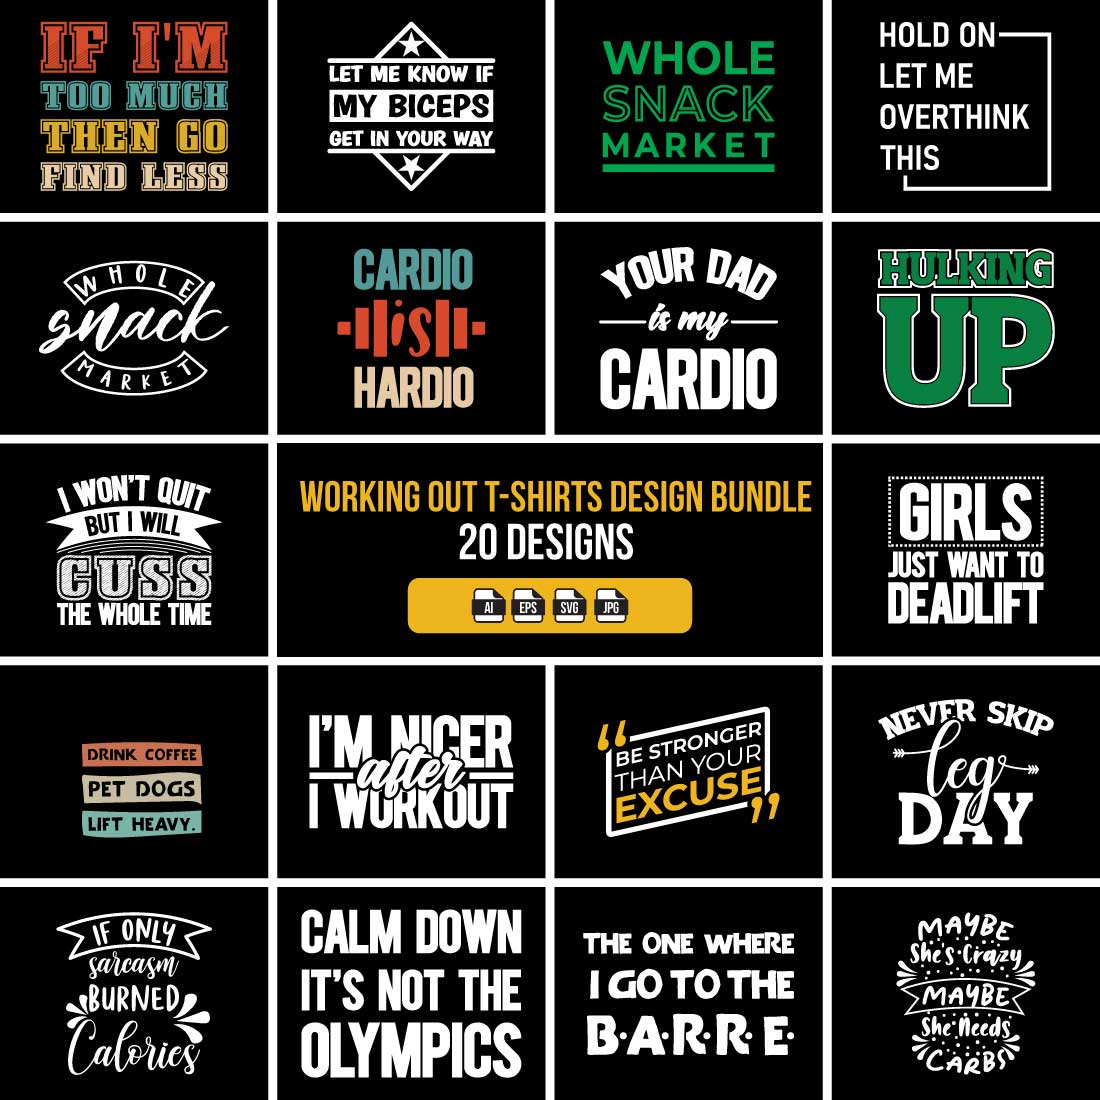 Working out T-shirt Bundle 20 Designs cover image.